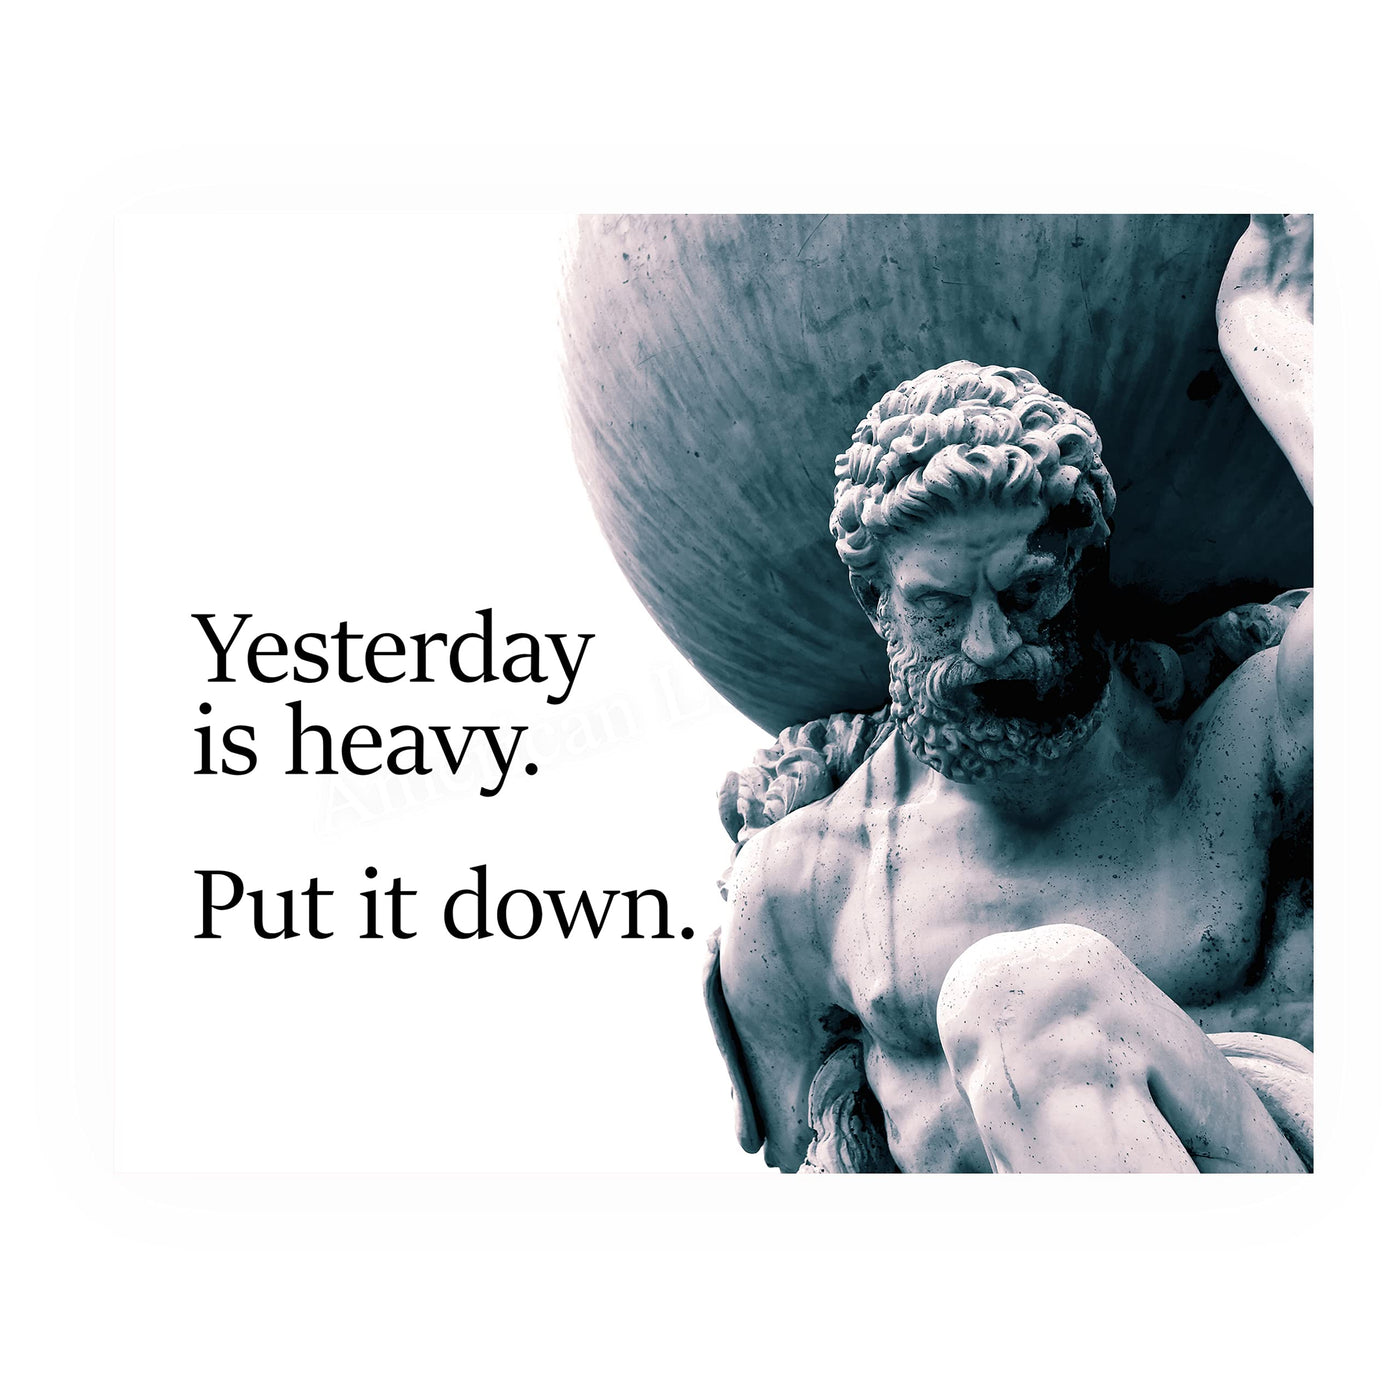 Yesterday Is Heavy-Put It Down Motivational Quotes Wall Art-10 x 8" Vintage Statue Photo Print-Ready to Frame. Inspirational Home-Office-School-Dorm Decor. Great for Motivation and Inspiration!